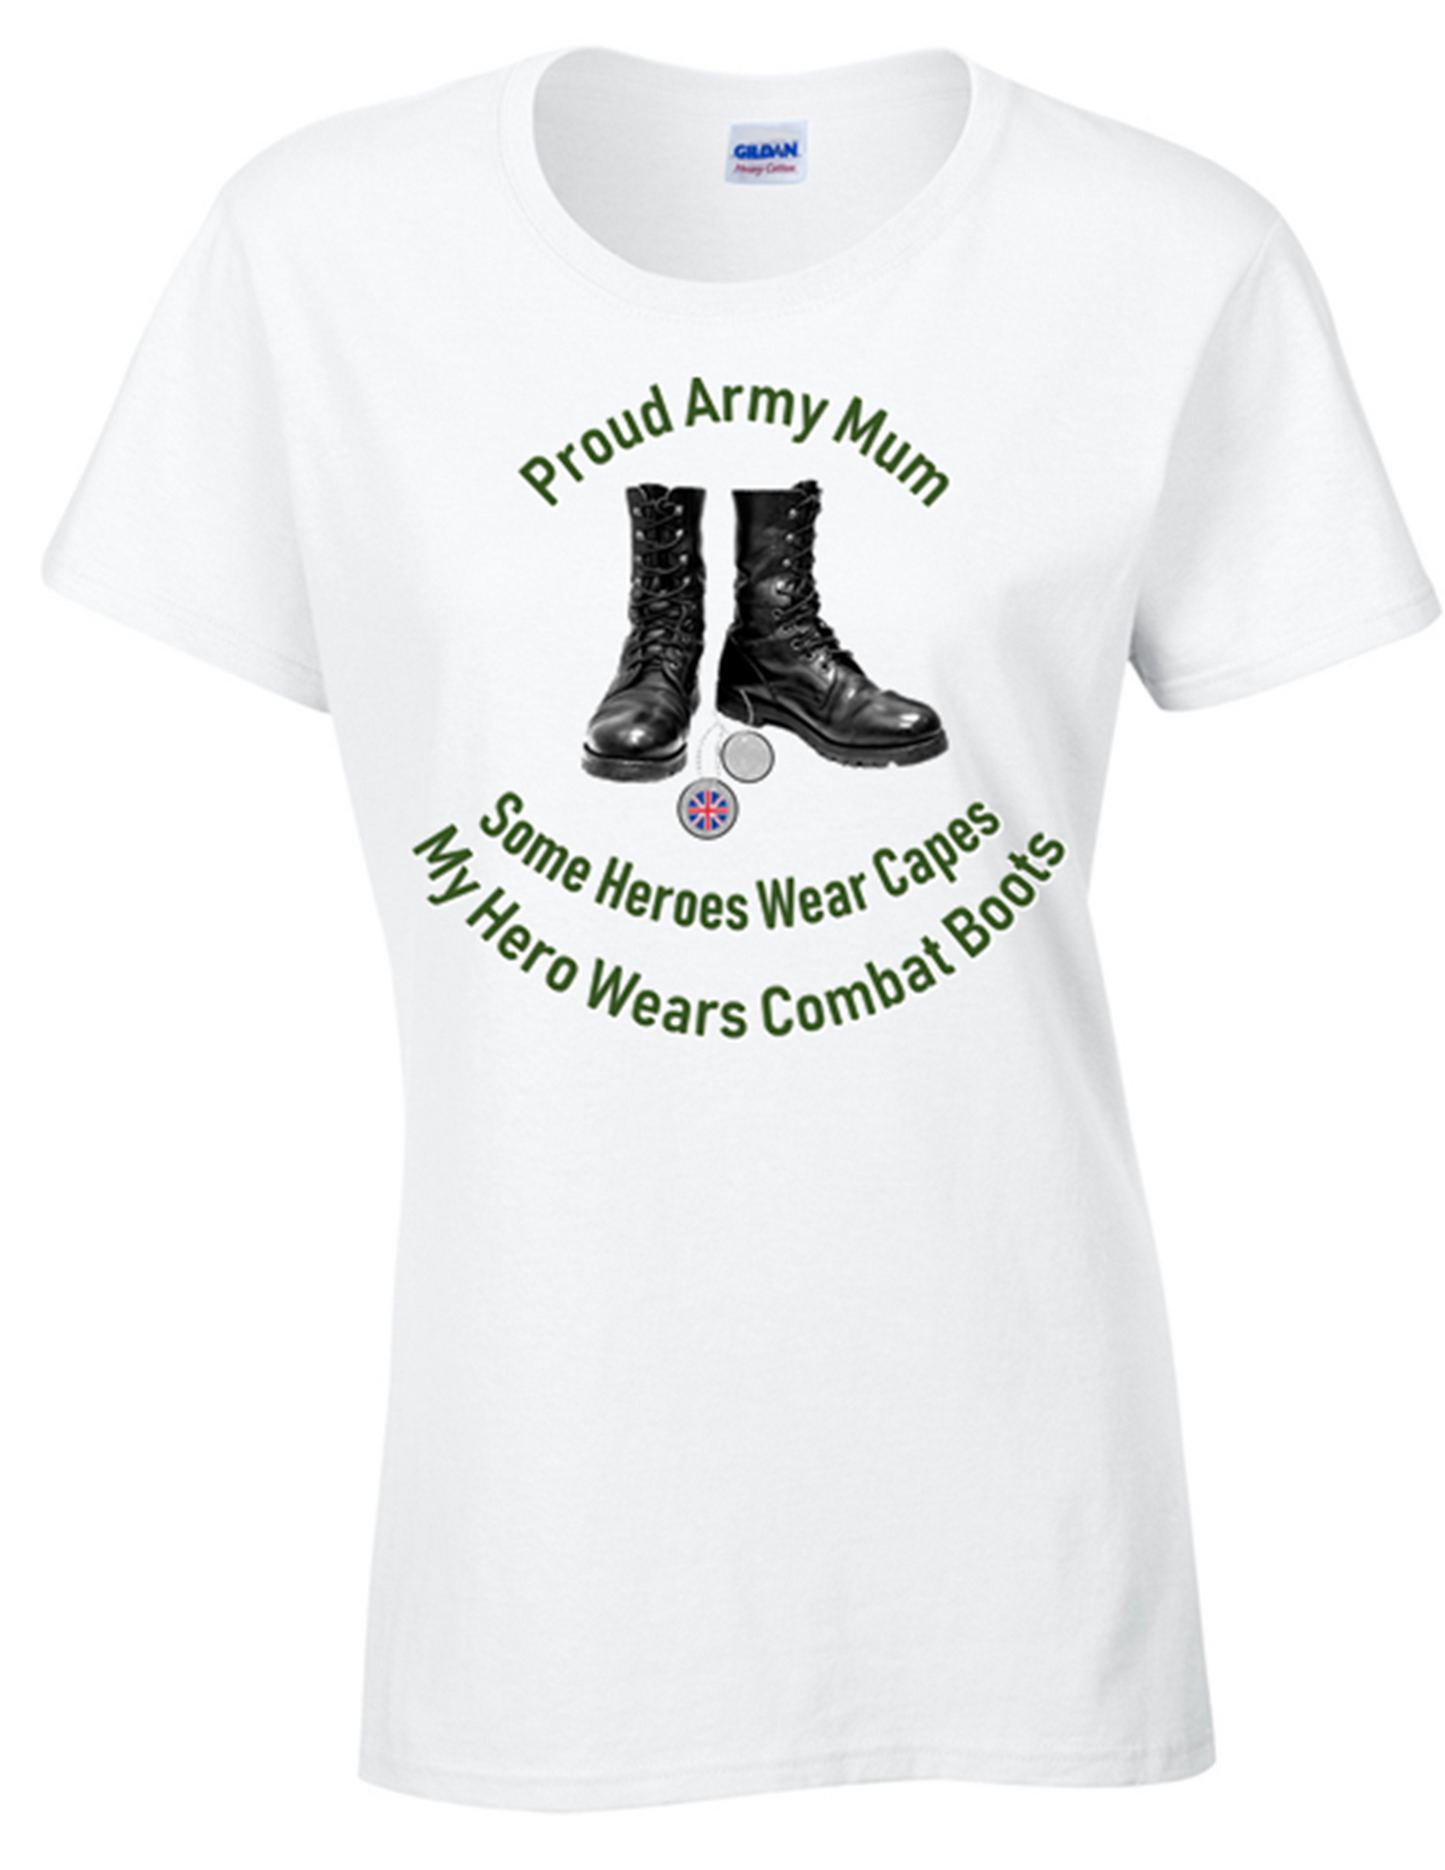 Proud Army Mum T-Shirt - Army 1157 Kit  Veterans Owned Business